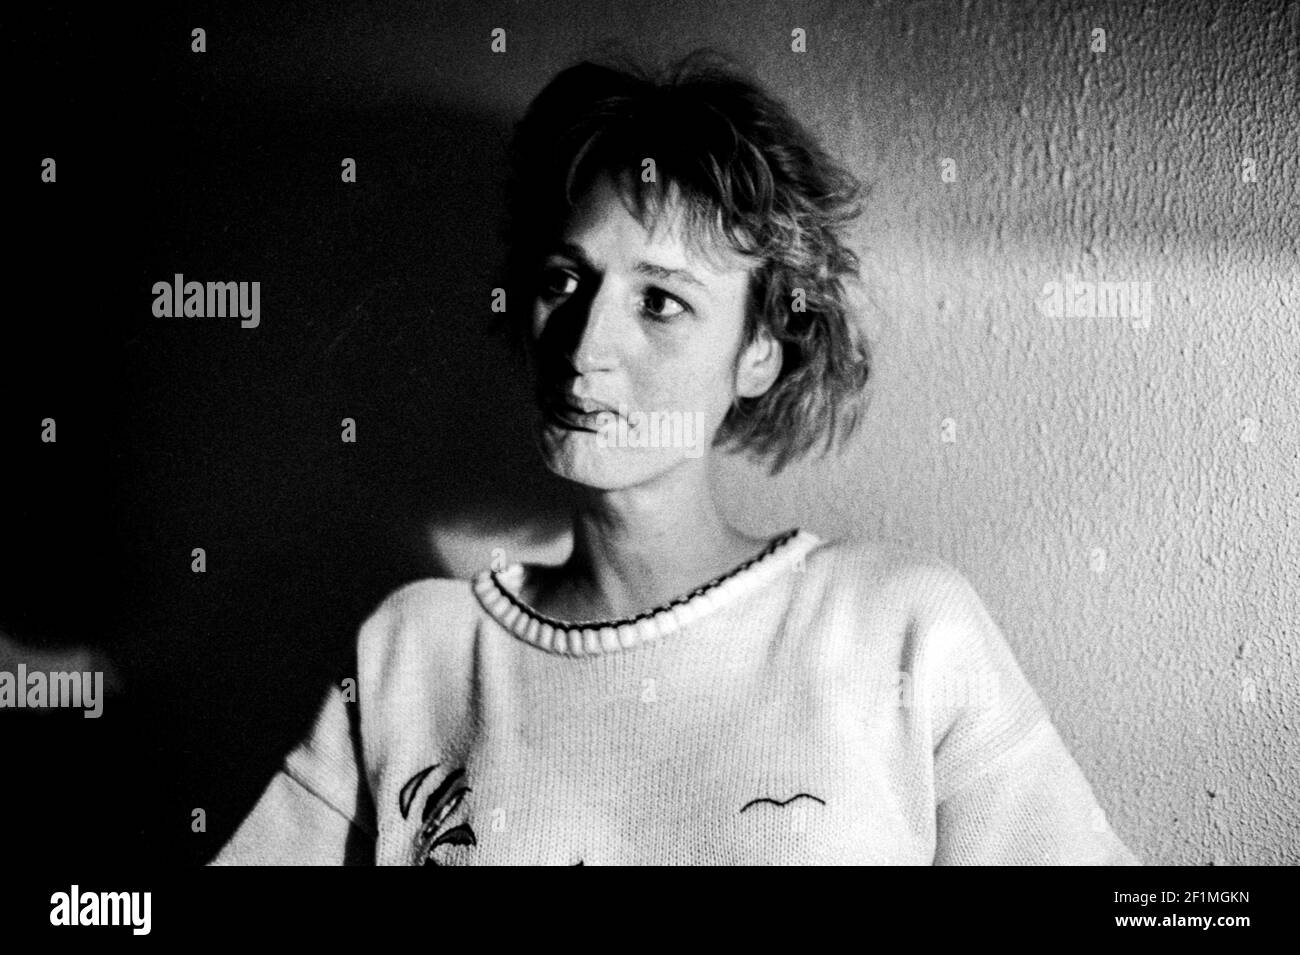 Tilburg, Netherlands. Portrait in black & white of a young woman in studio with a single light from the left. Shot on Analog Black and White Film in 1992. Stock Photo